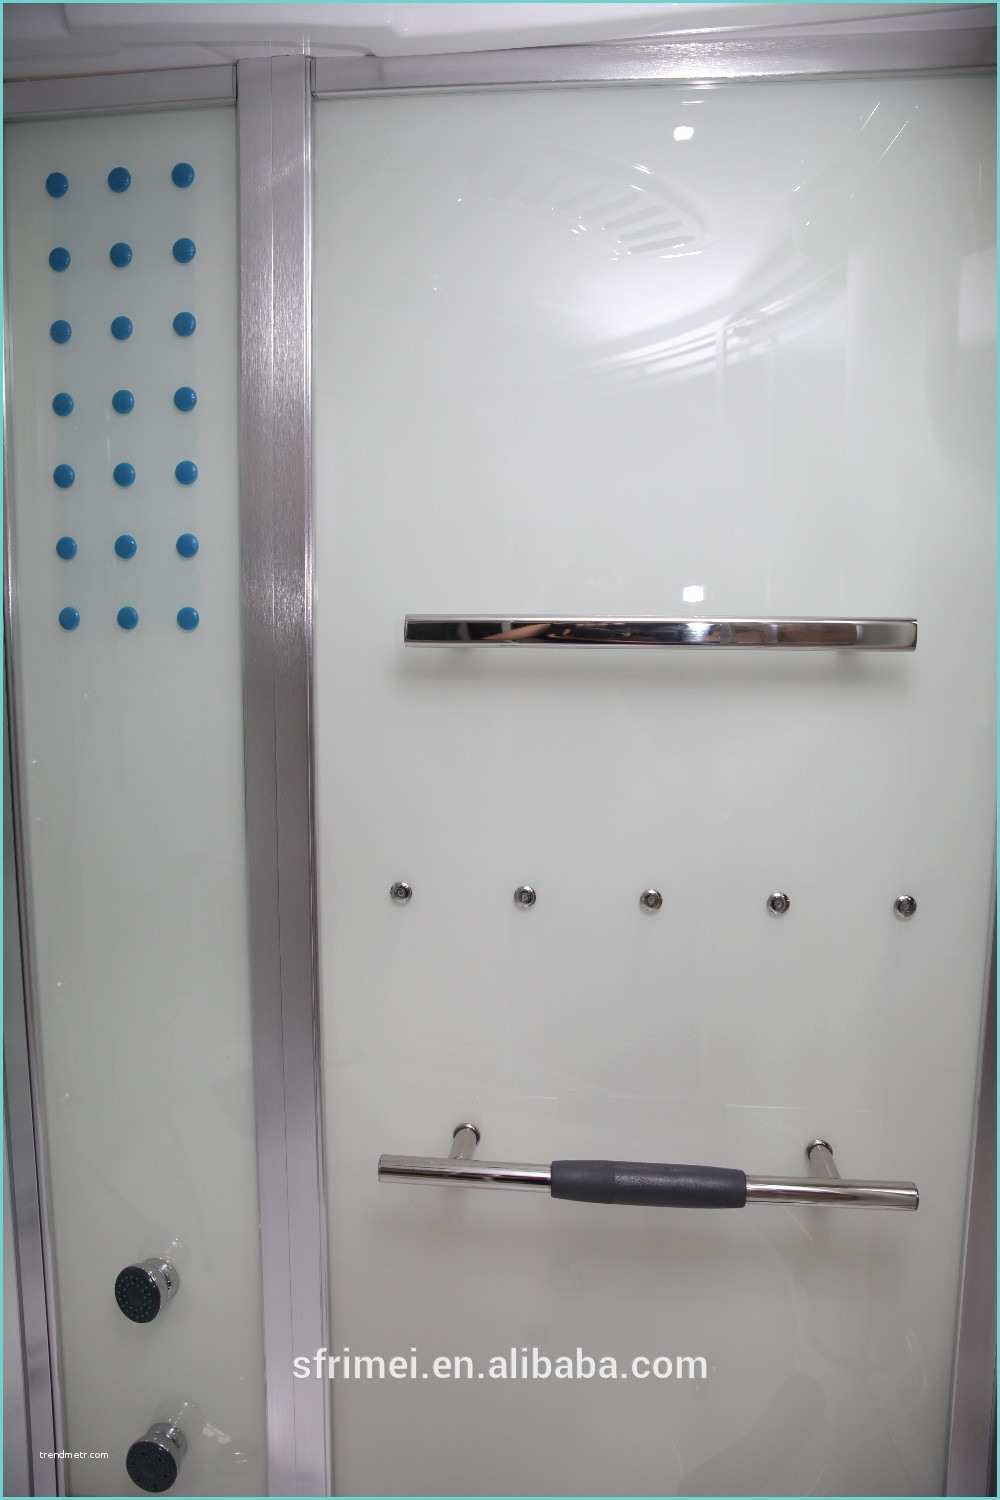 China Low Tub Sector Shower Cabin Manufacturers Luxury Steam Room with Whirlpool Tub Shower Cabin Shower